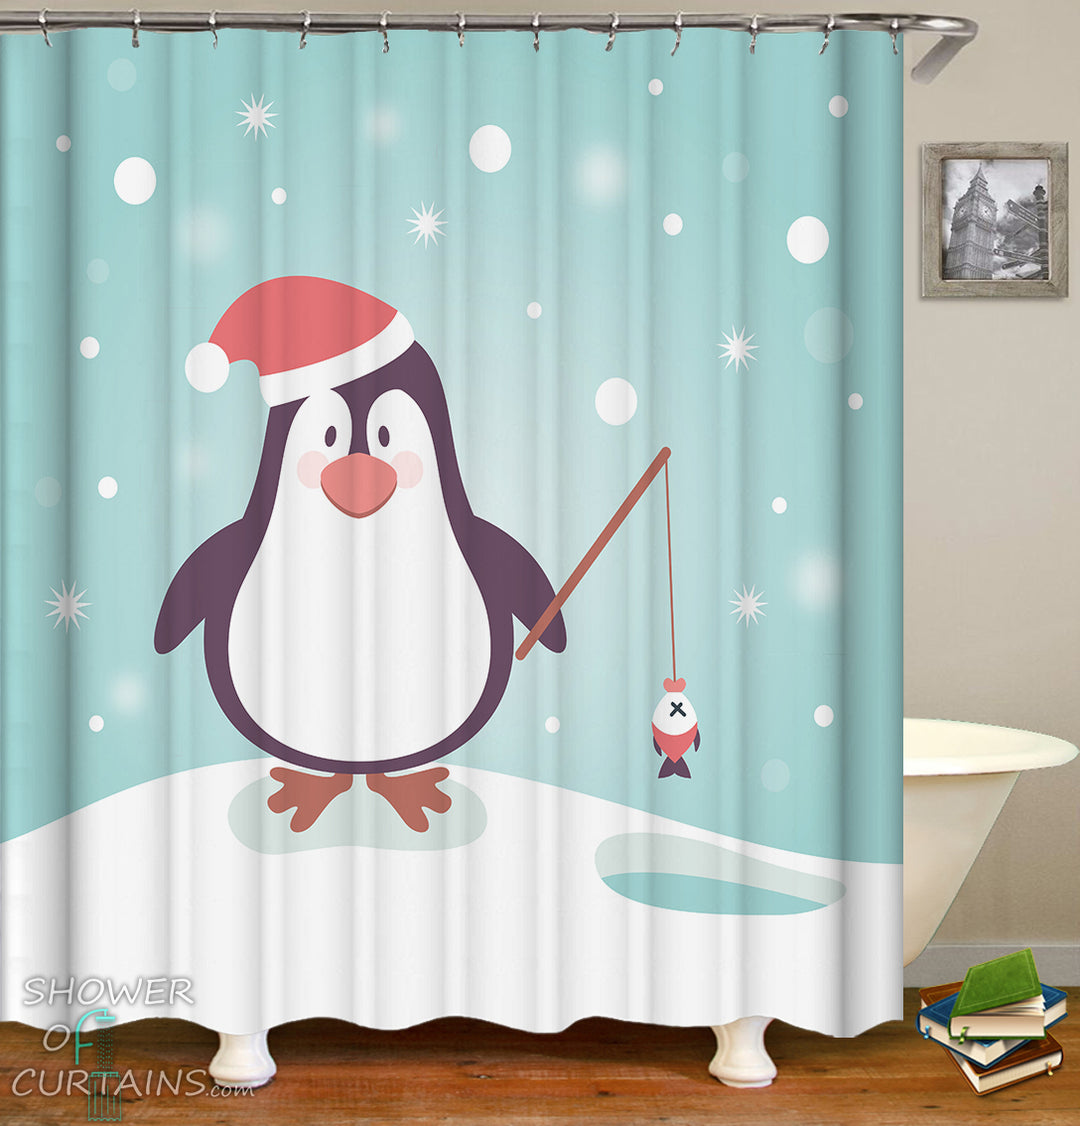 Penguin Shower Curtain for Christmas - Cute Penguin With Santa Hat